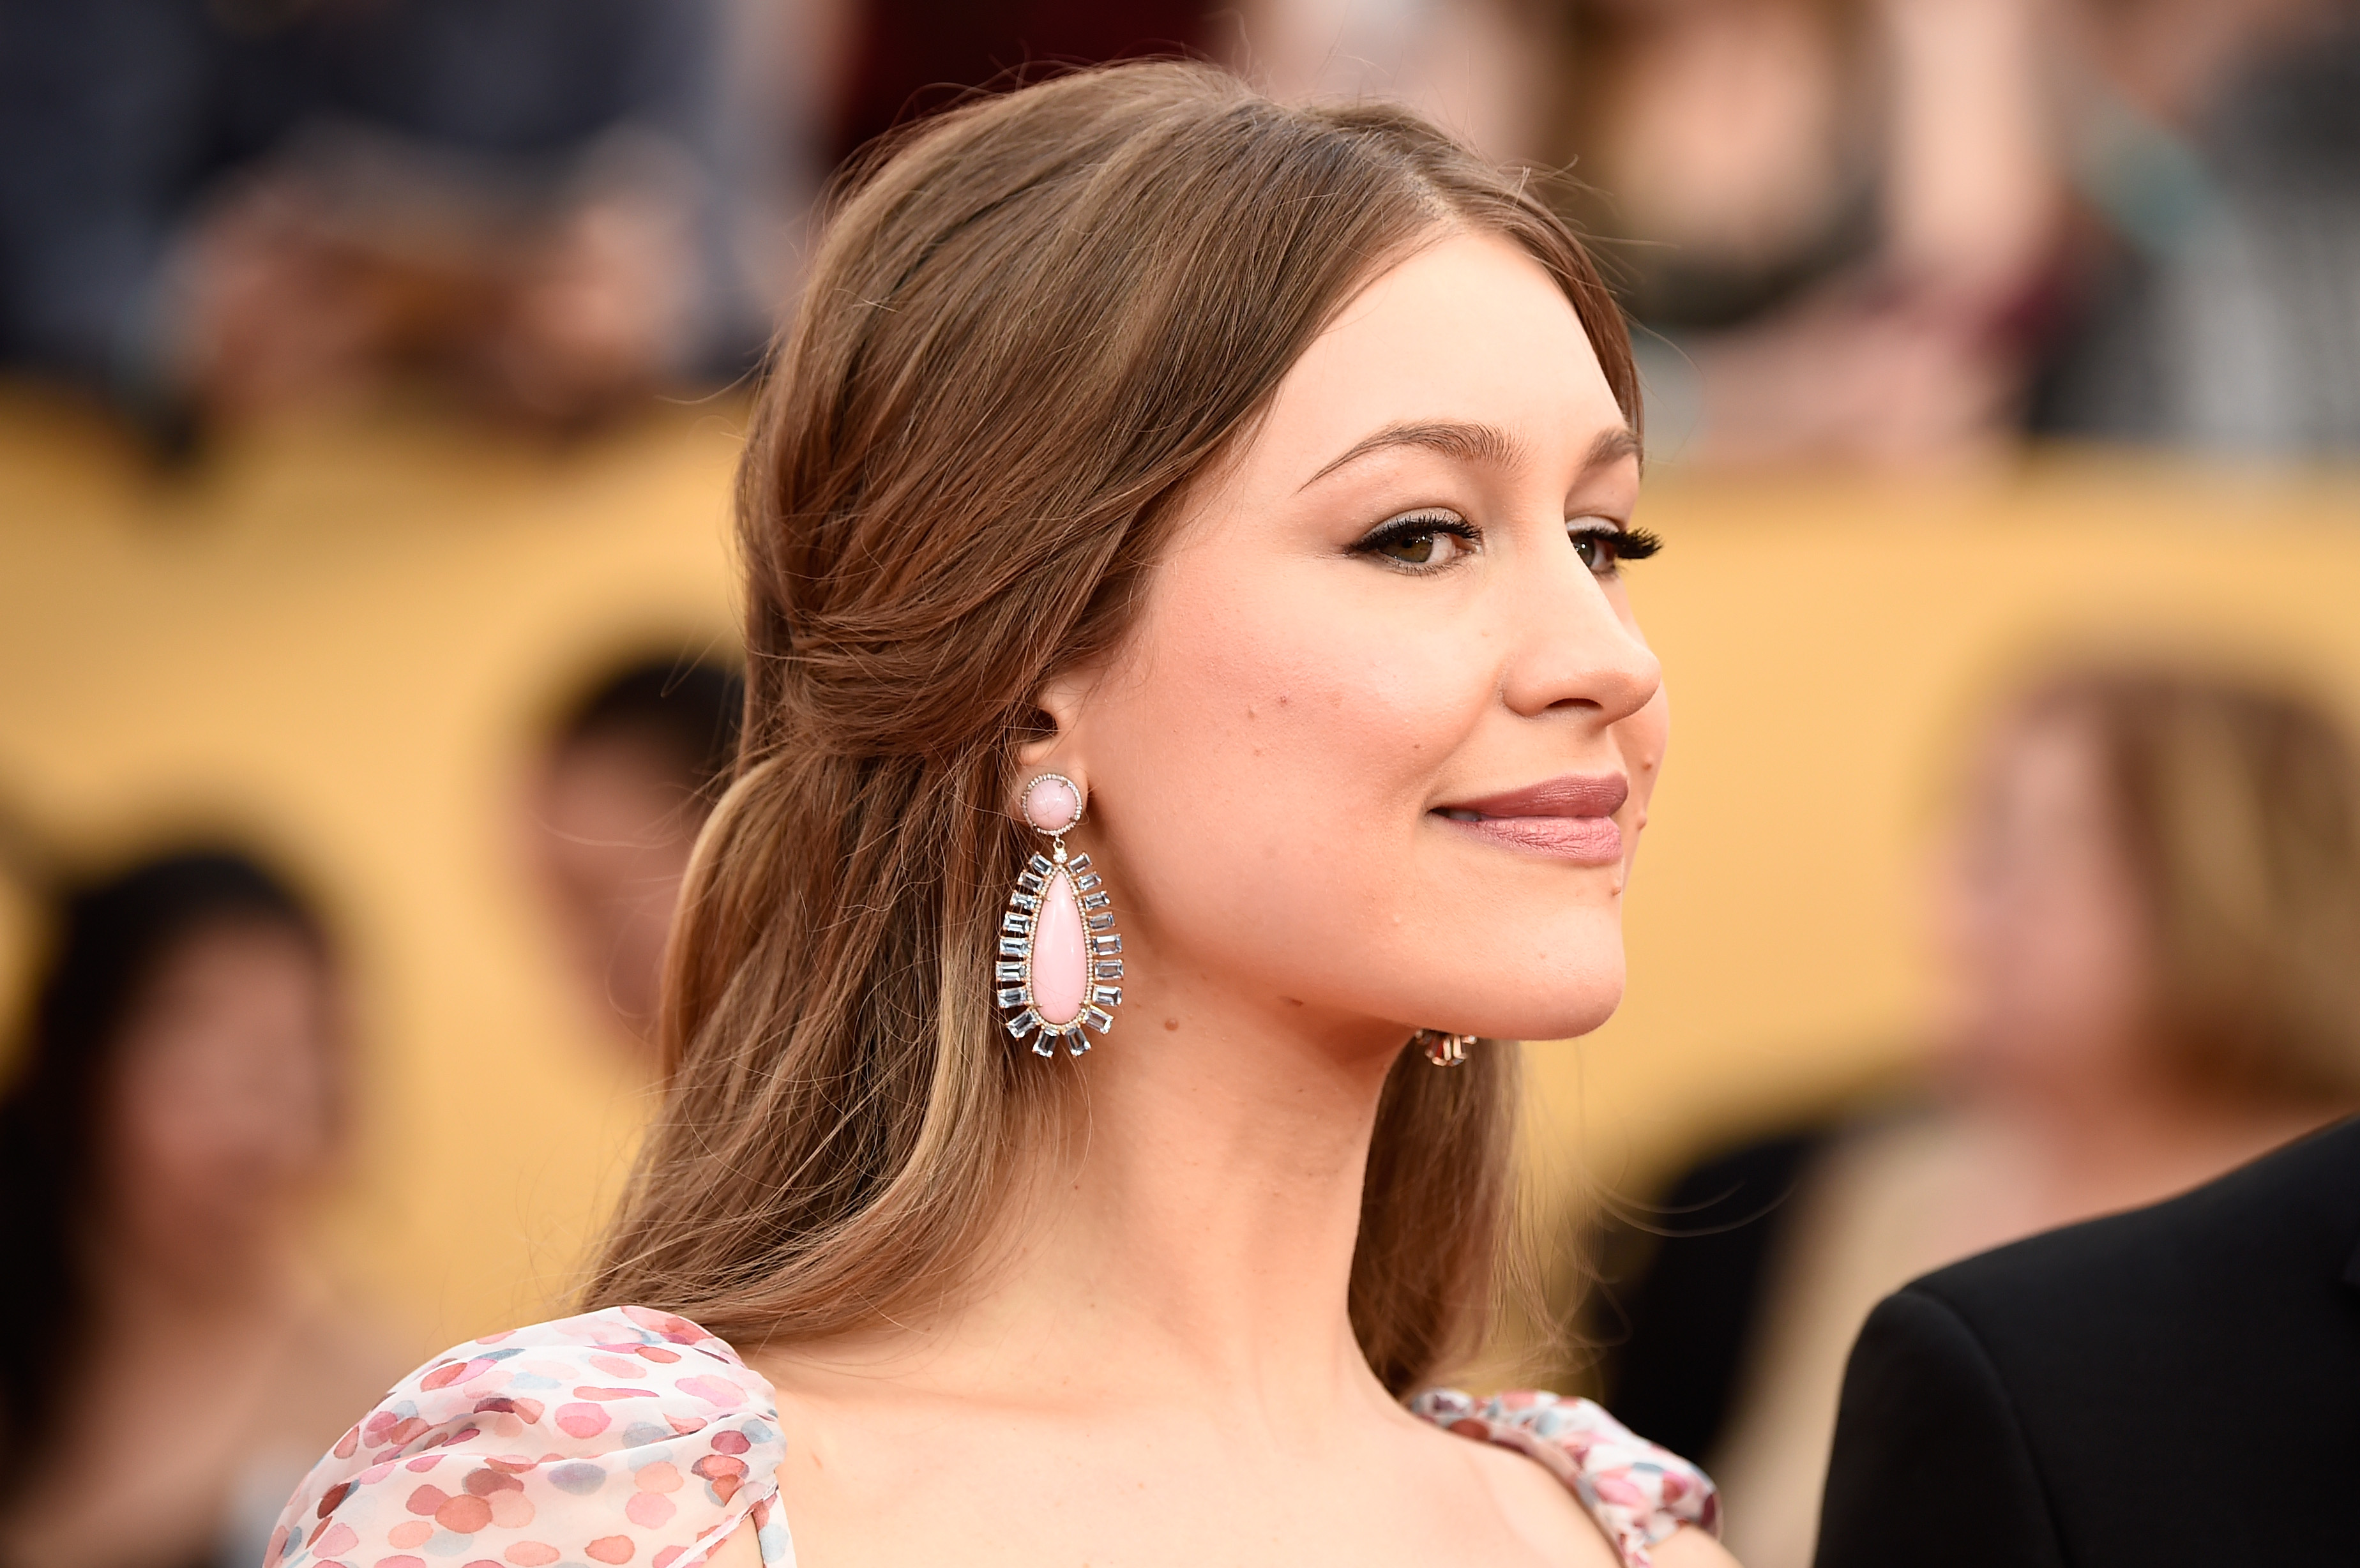 Joanna Newsom attends the 21st Annual Screen Actors Guild Awards on Jan. 25, 2015 in Los Angeles. (Frazer Harrison—Getty Images)